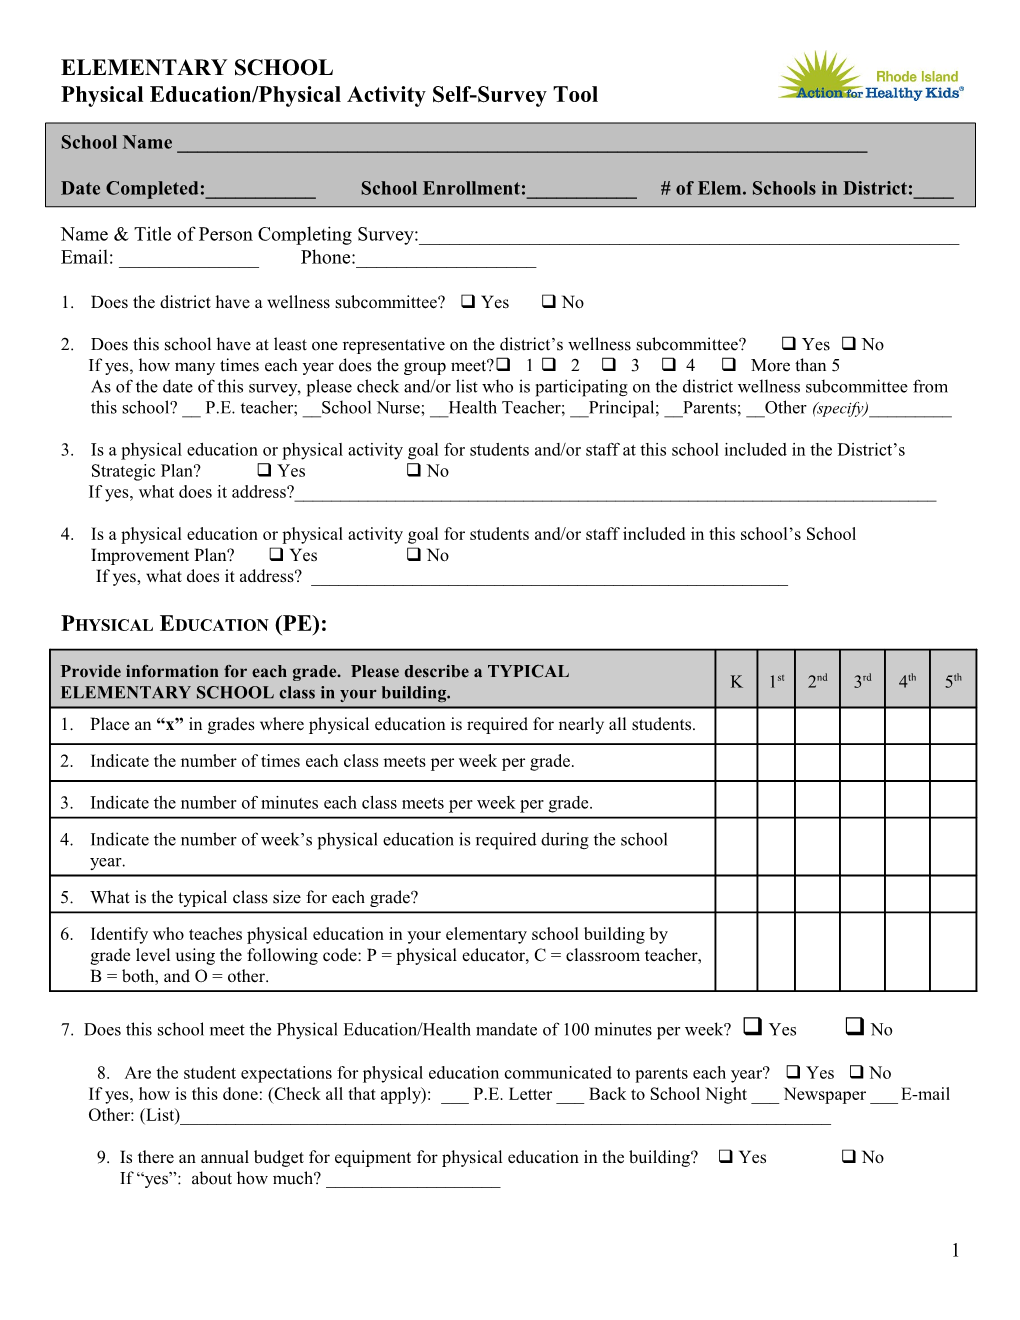 Physical Education / Physical Activity Survey for Elementary School